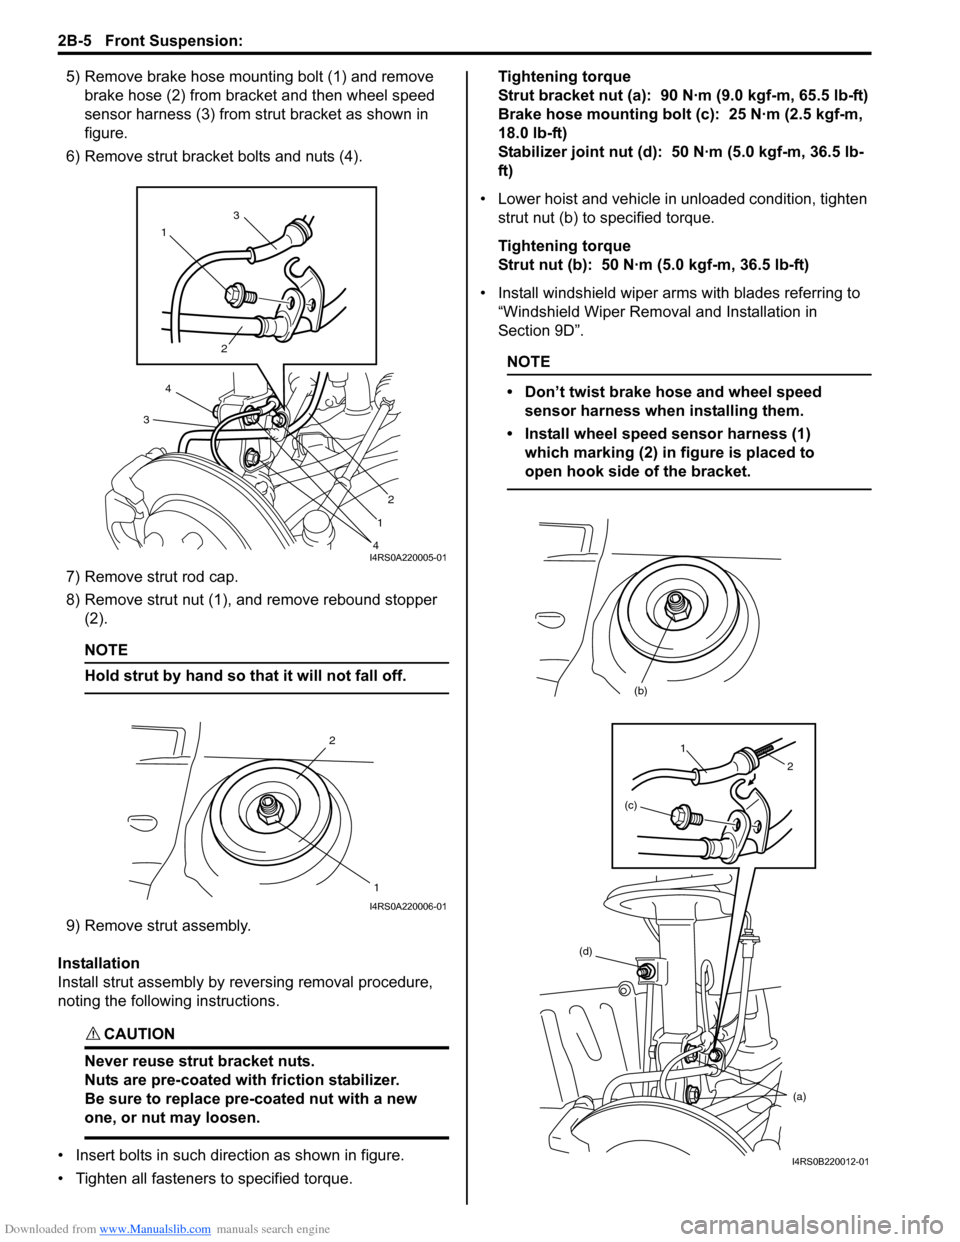 SUZUKI SWIFT 2007 2.G Service Workshop Manual Downloaded from www.Manualslib.com manuals search engine 2B-5 Front Suspension: 
5) Remove brake hose mounting bolt (1) and remove brake hose (2) from bracket and then wheel speed 
sensor harness (3) 